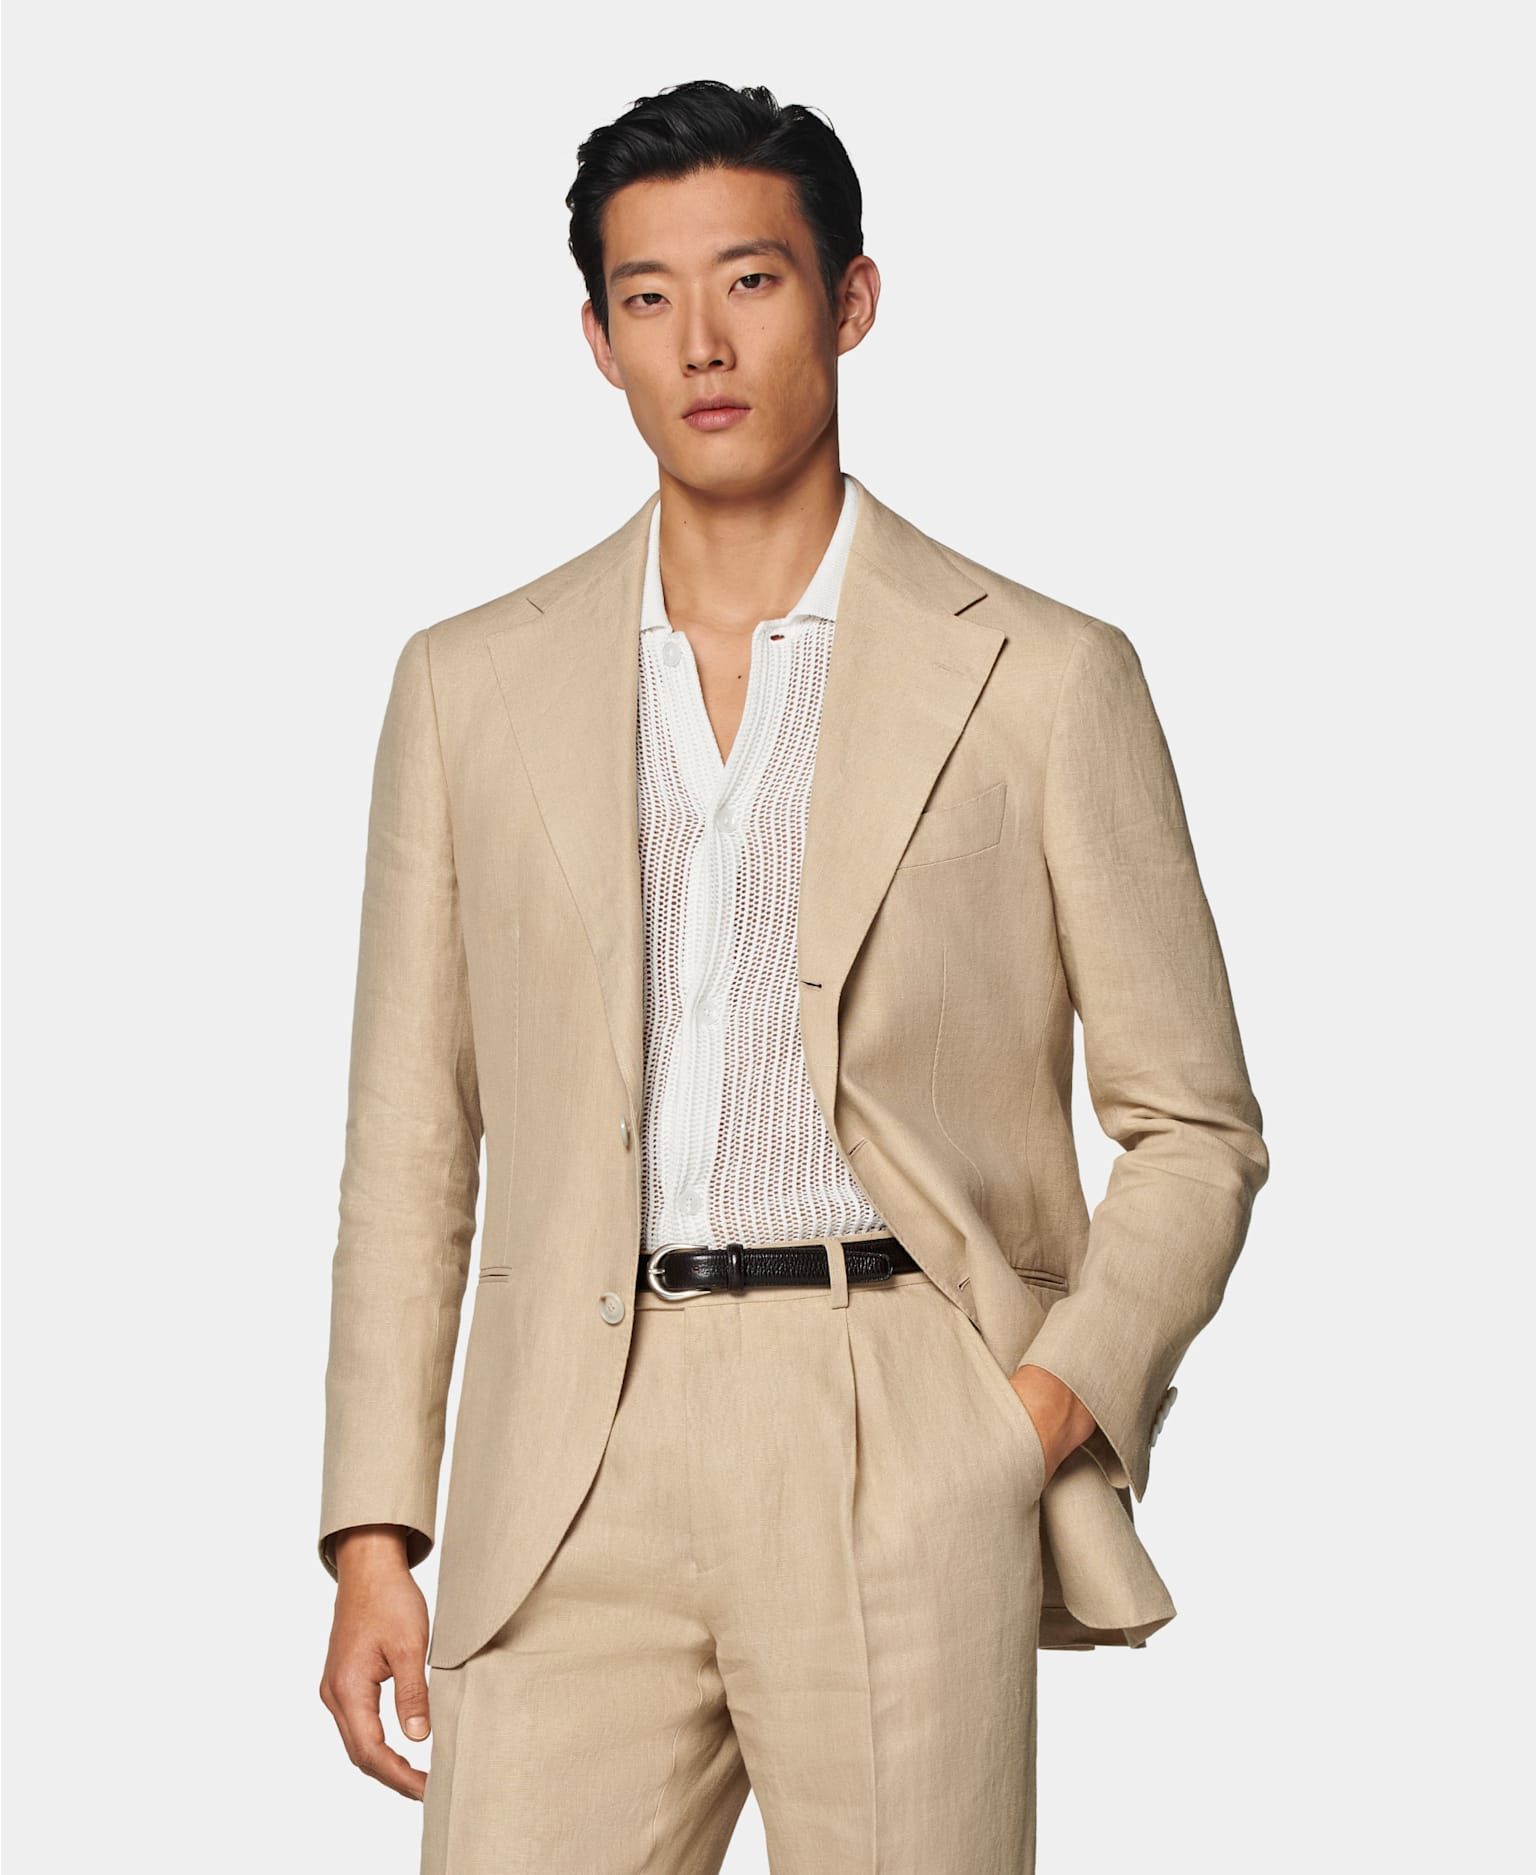 Sand-colored single-breasted suit with off-white crocheted polo shirt and black belt.